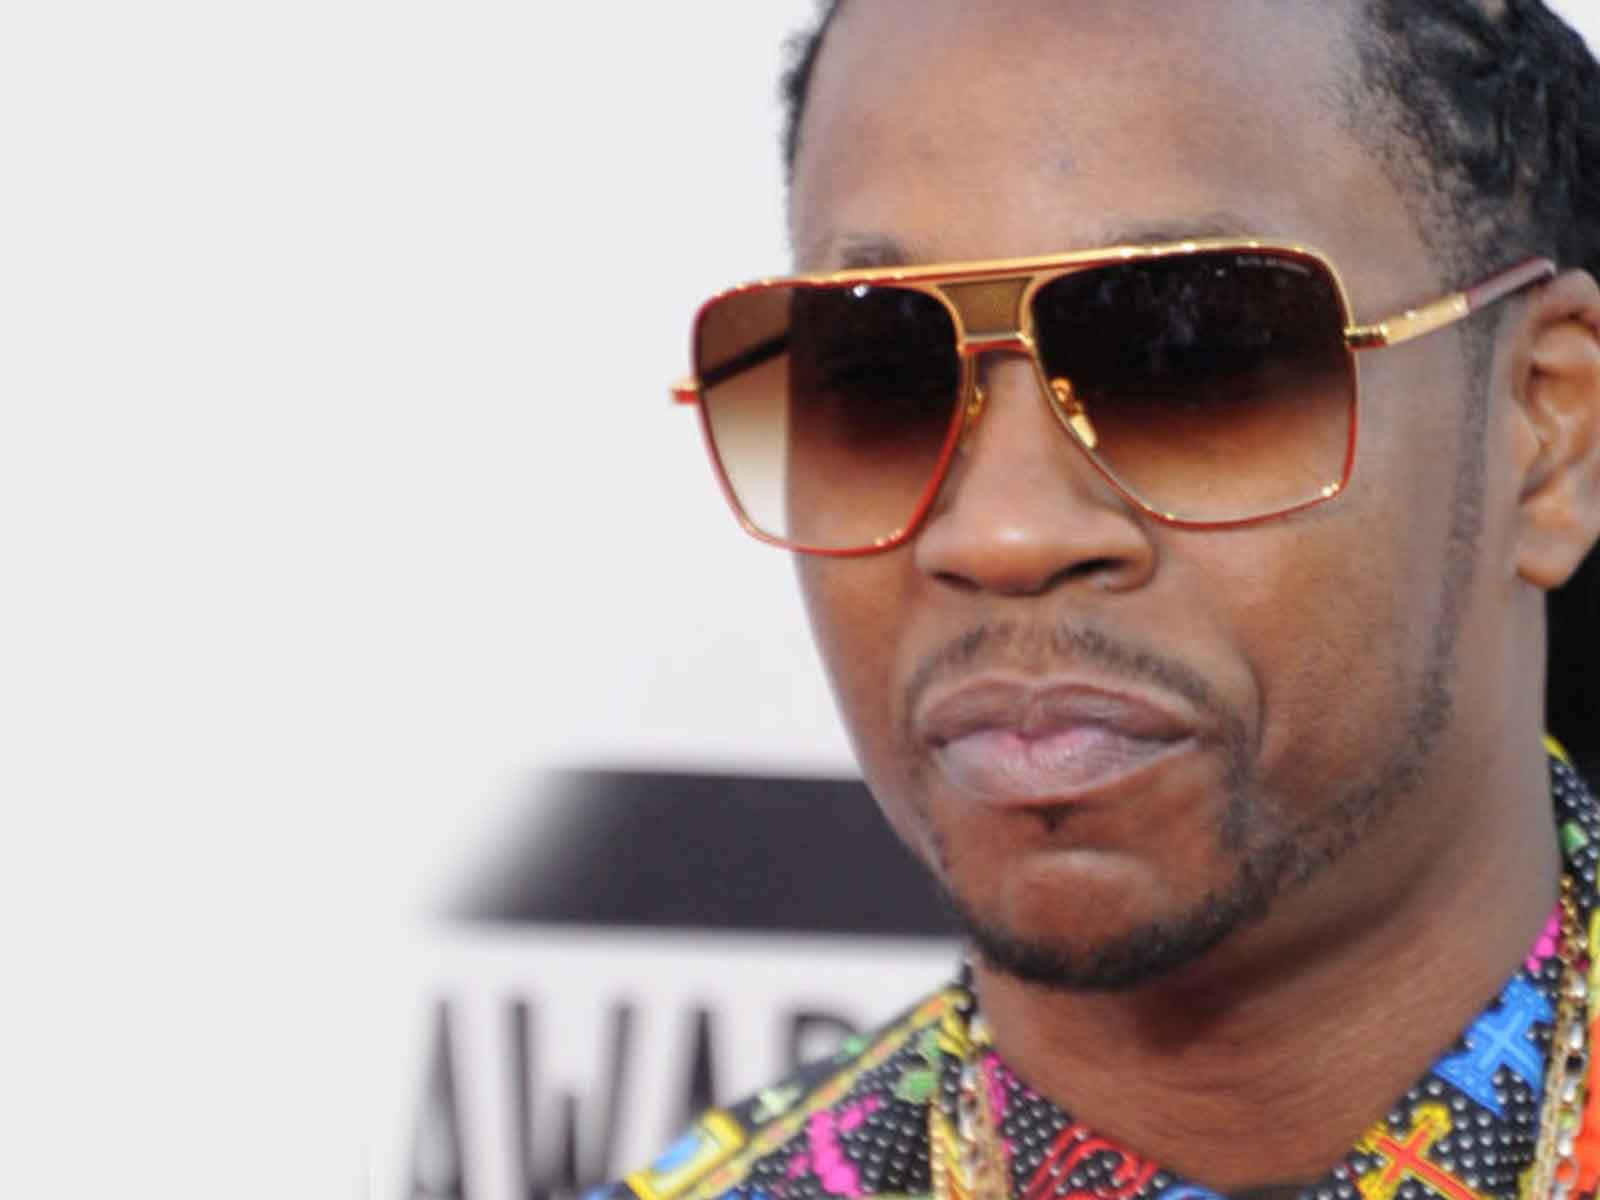 2 Chainz Sued Over Bodyguard’s Scuffle with Photog at 30 Rock